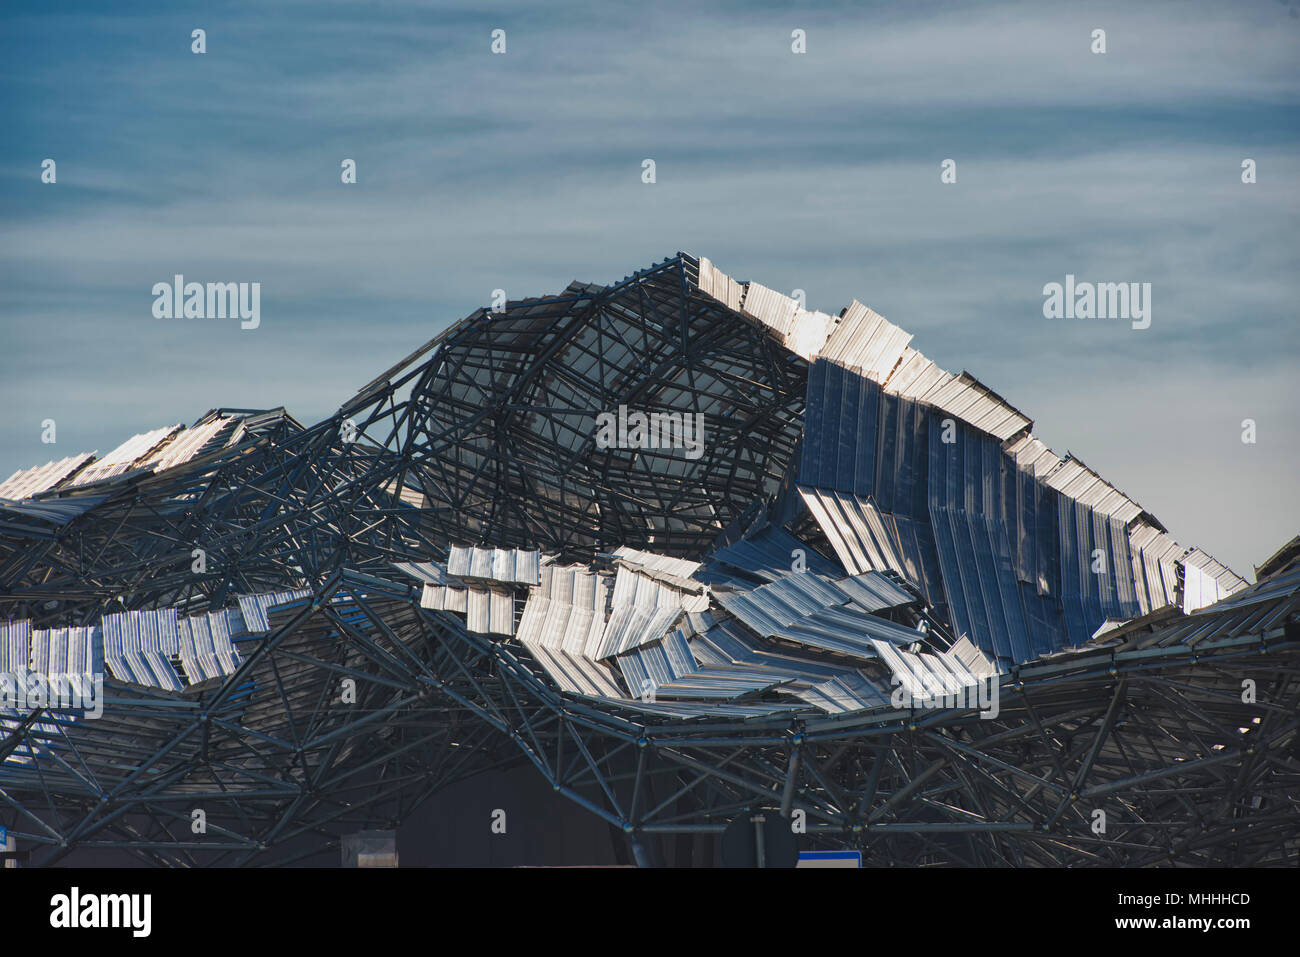 Destroyed metallic roof after hurricane Stock Photo